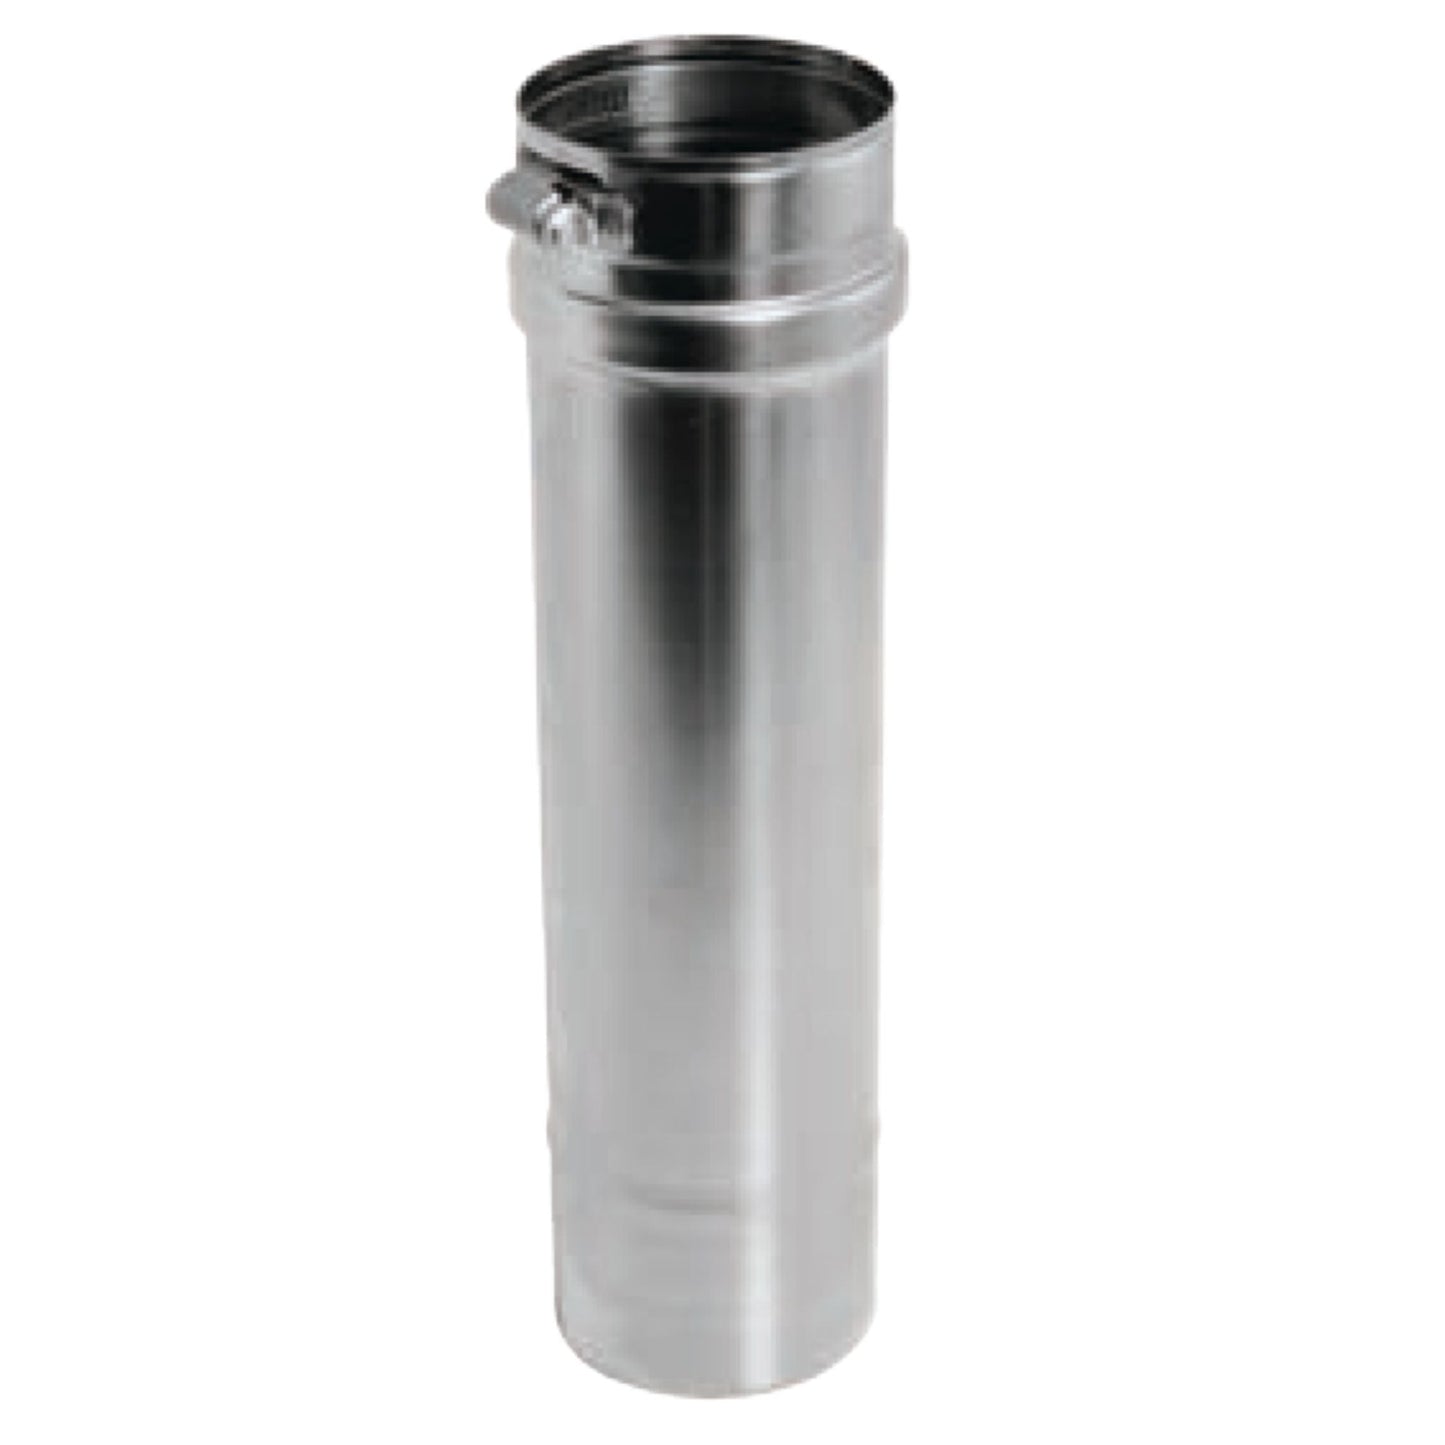 DuraVent FasNSeal 12" x 24" 316L Stainless Steel Vent Length